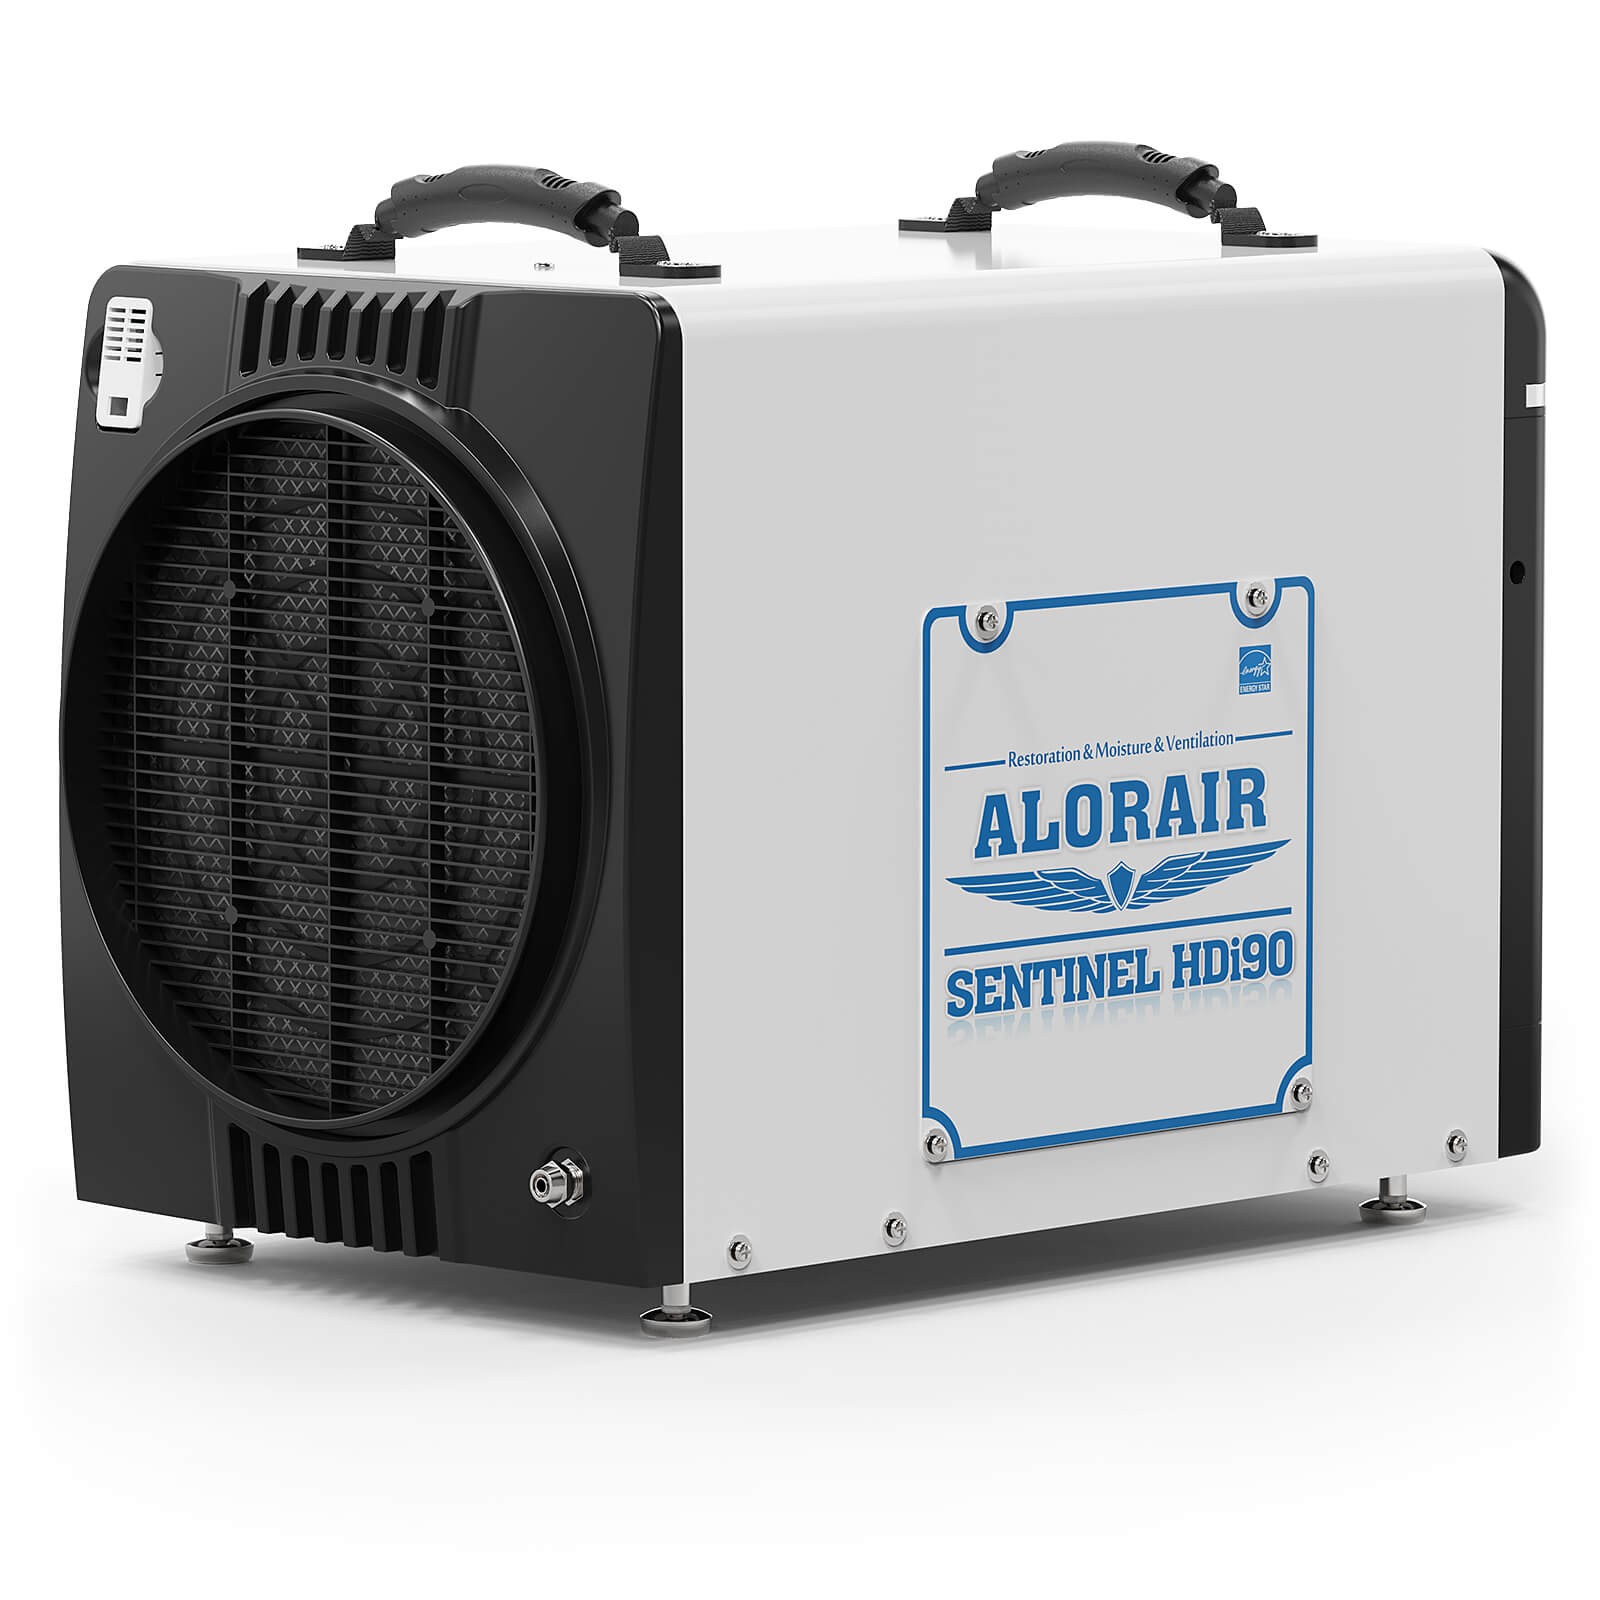 AlorAir Sentinel Energy Star 90 Pint at AHAM Dehumidifier for Crawl Spaces, Basements, or Water Damage Up to 2,600 Sq. Ft. - Ducted